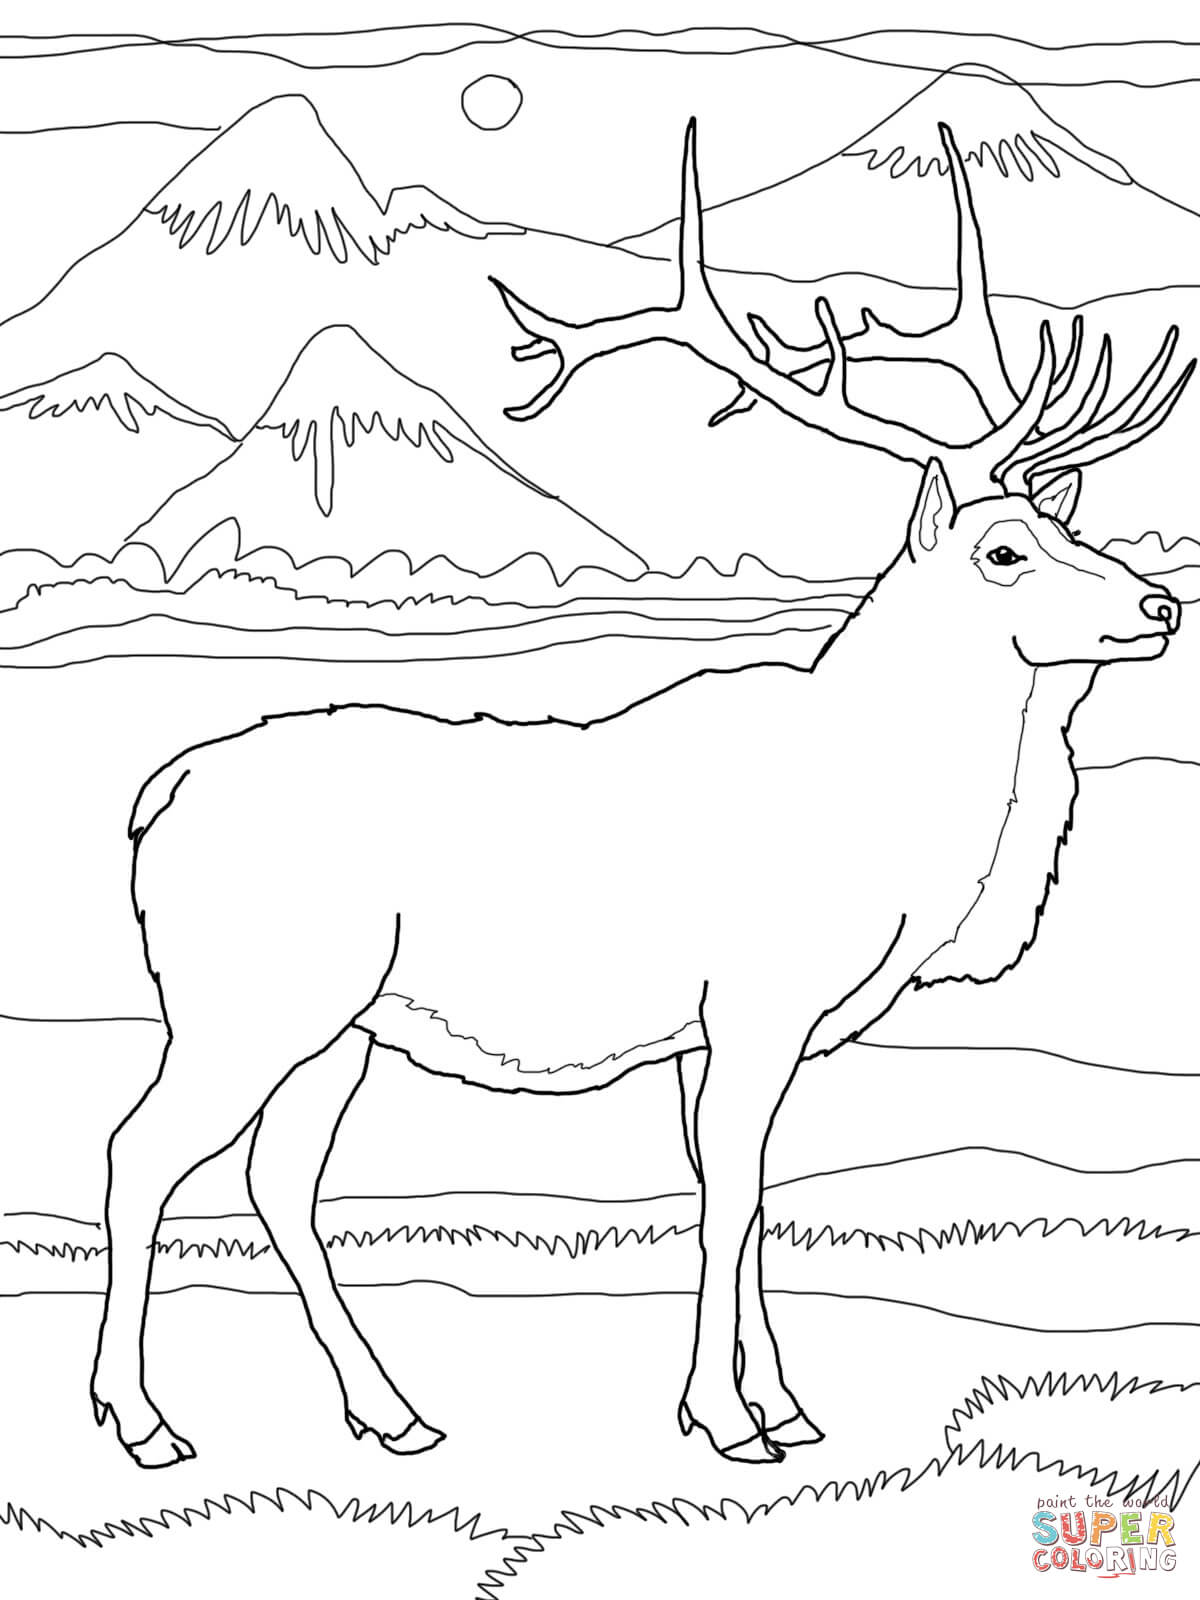 Elk or Wapiti coloring page | Free Printable Coloring Pages